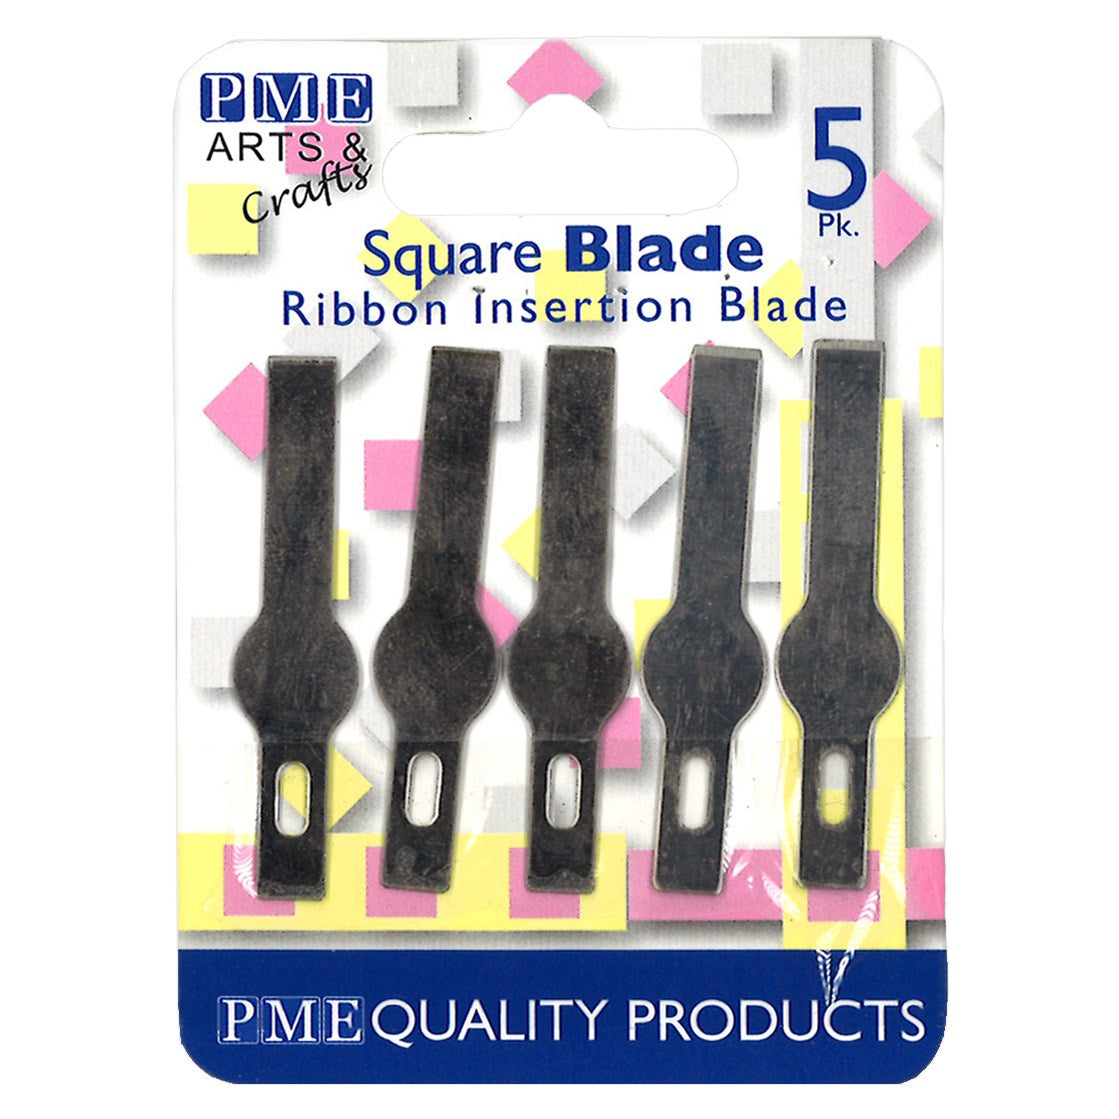 Square Blade 5 pack